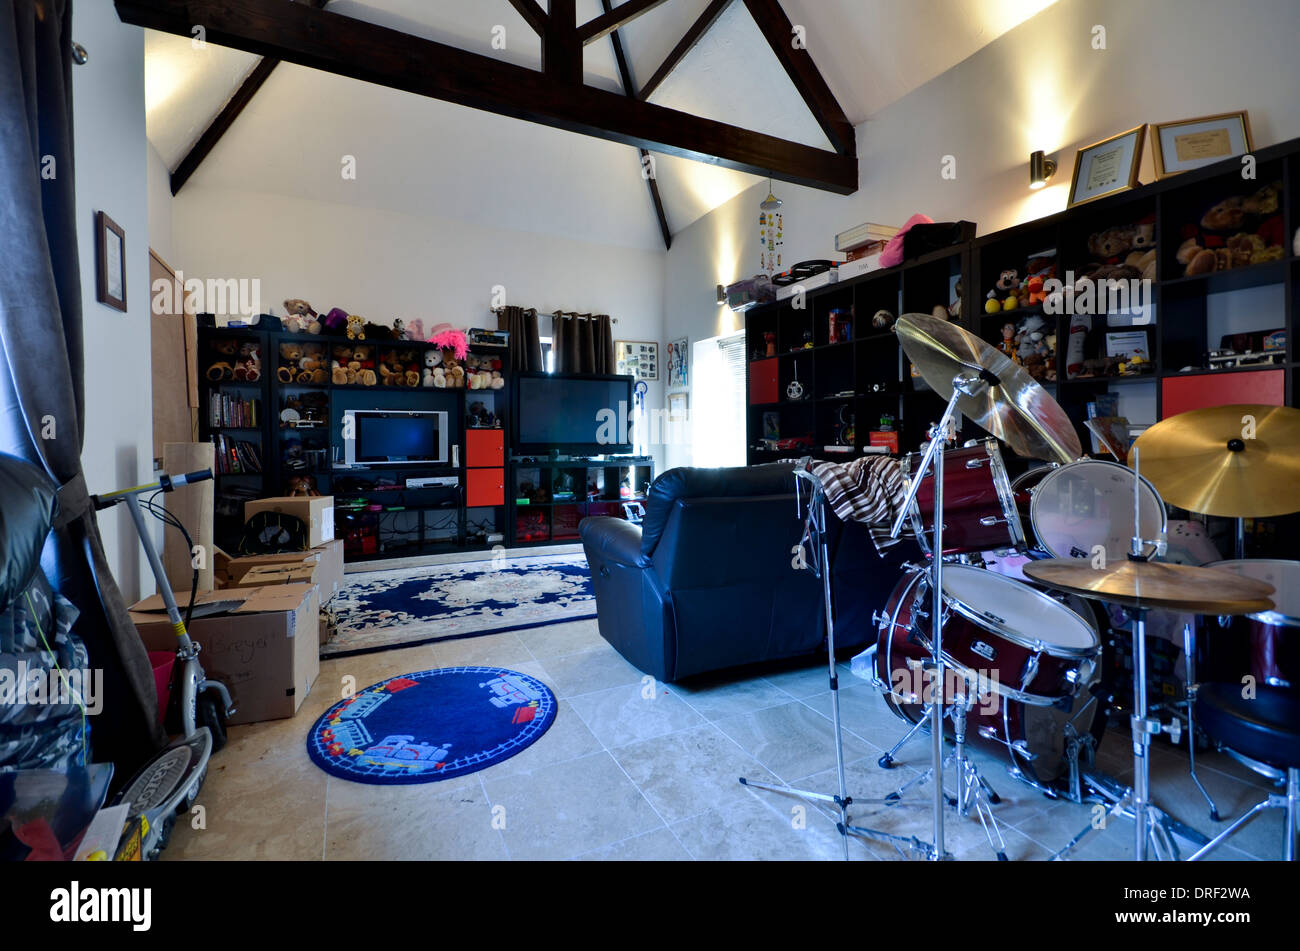 Teenagers play room with drum kit, tv and games consoles Stock Photo